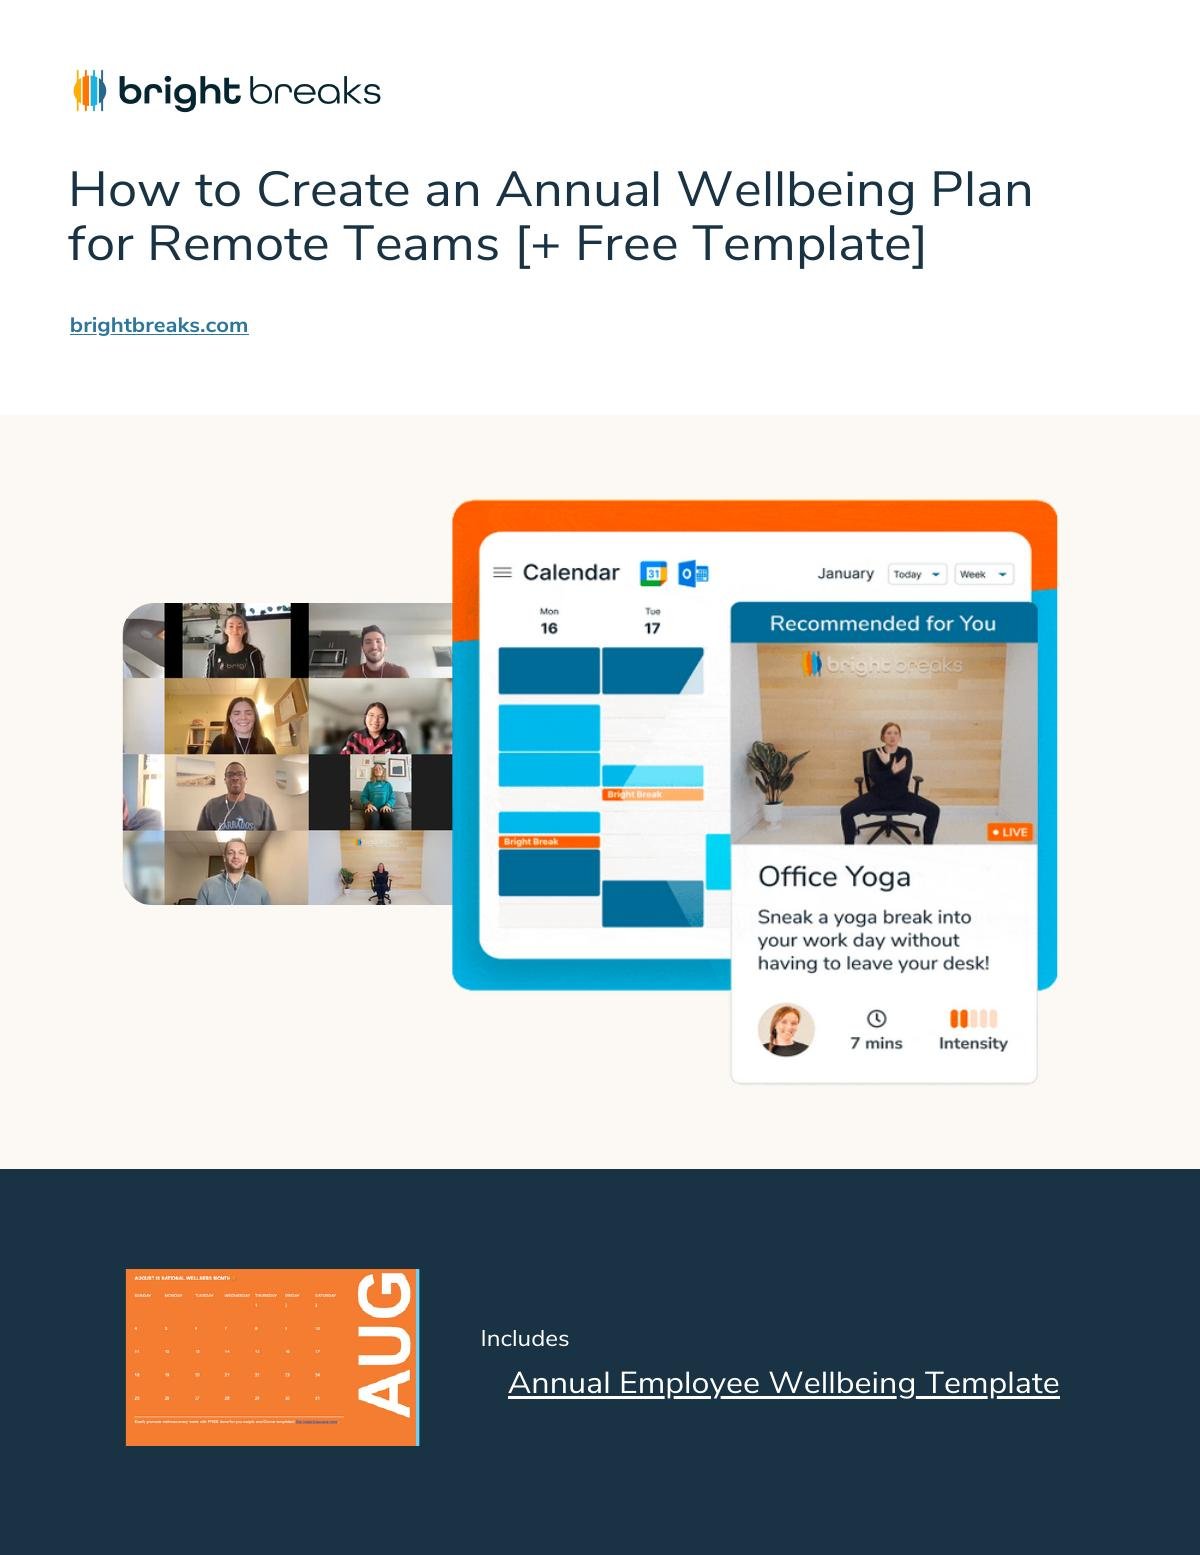 How to Create an Annual Wellbeing Plan for Remote Teams [+ Free Template]